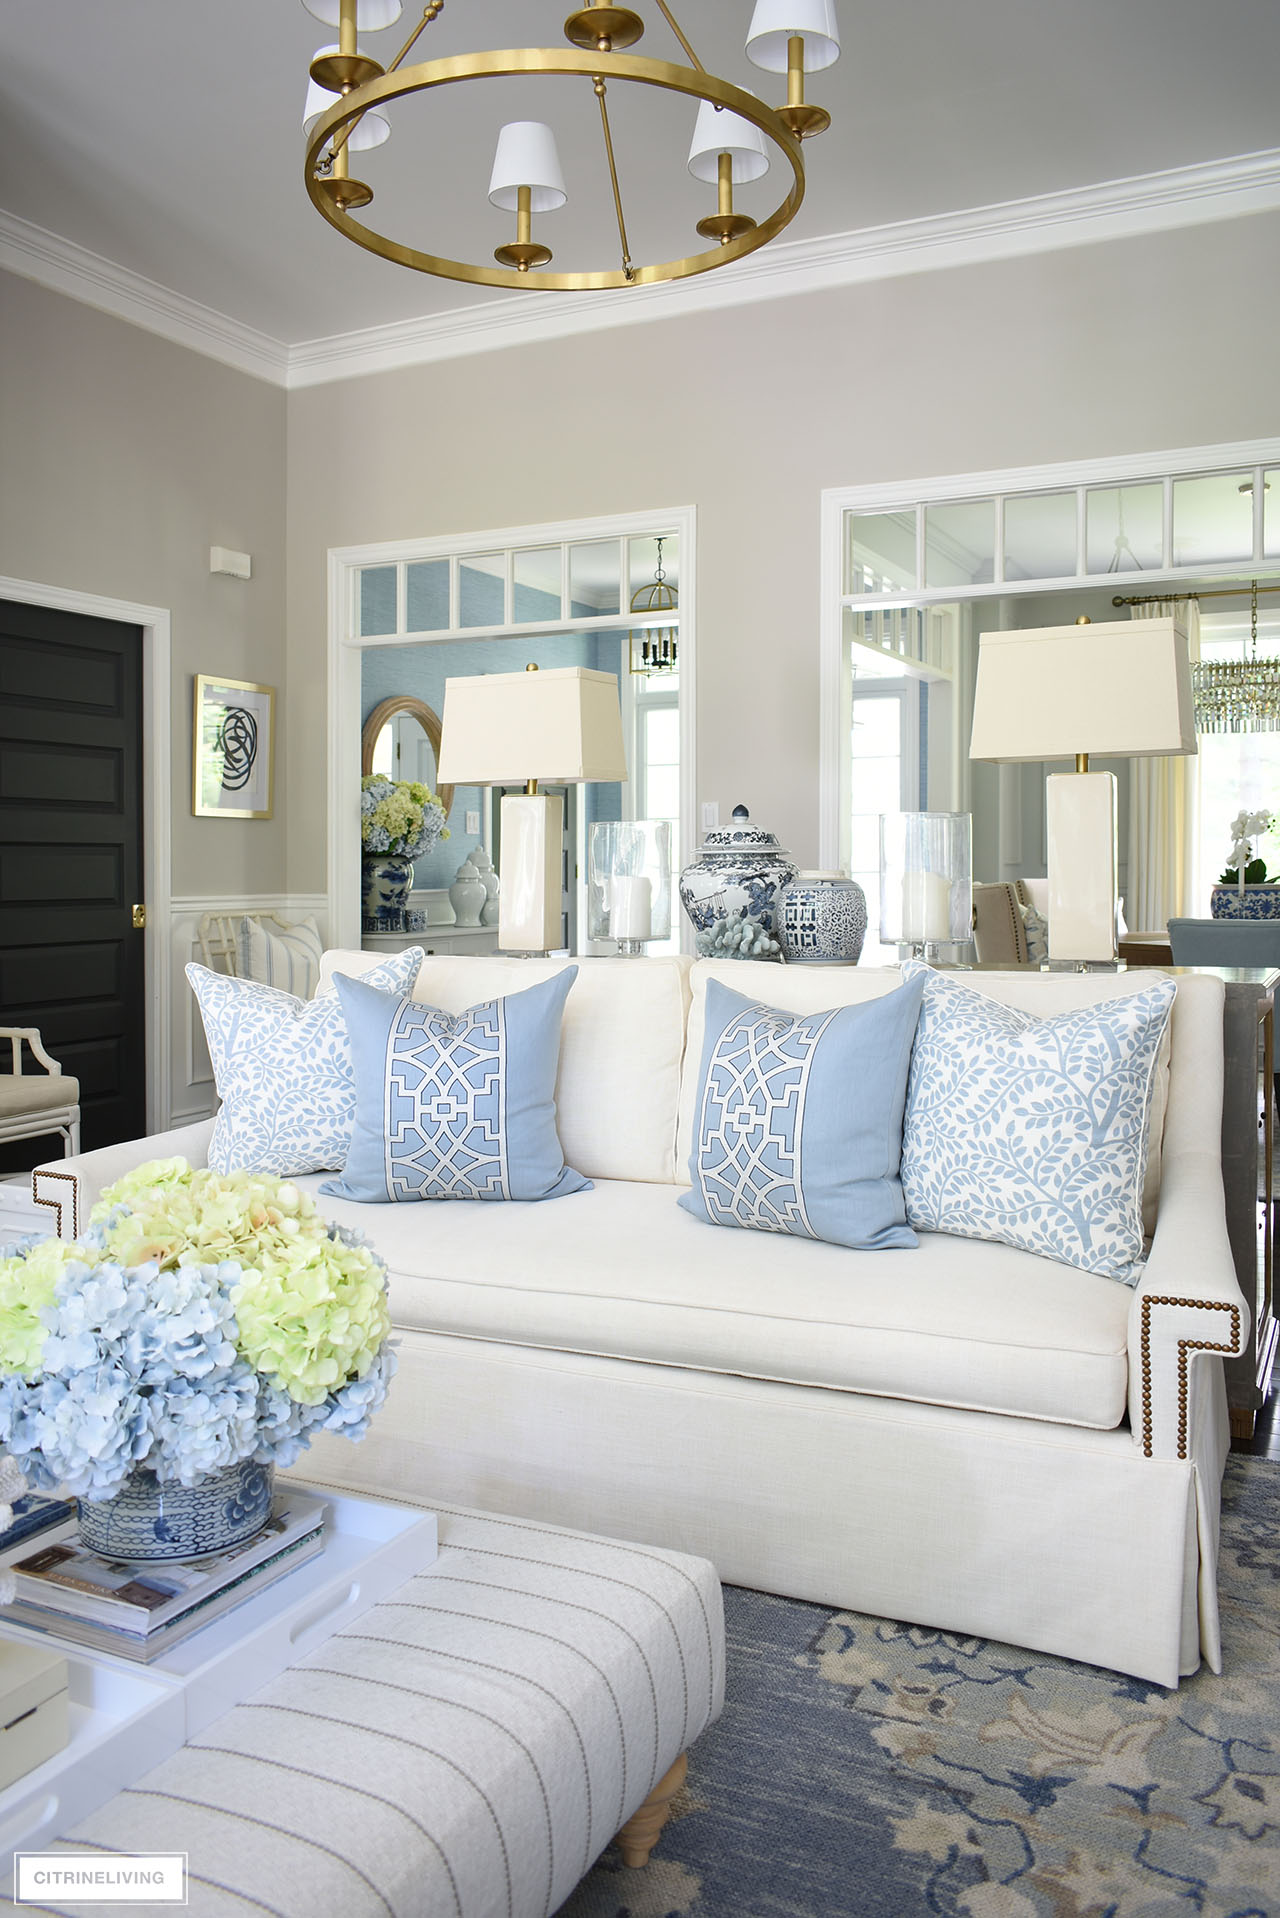 Living room with tailored white sofa decorated with soft blue and white designer pillows is chic and elegant for summer.